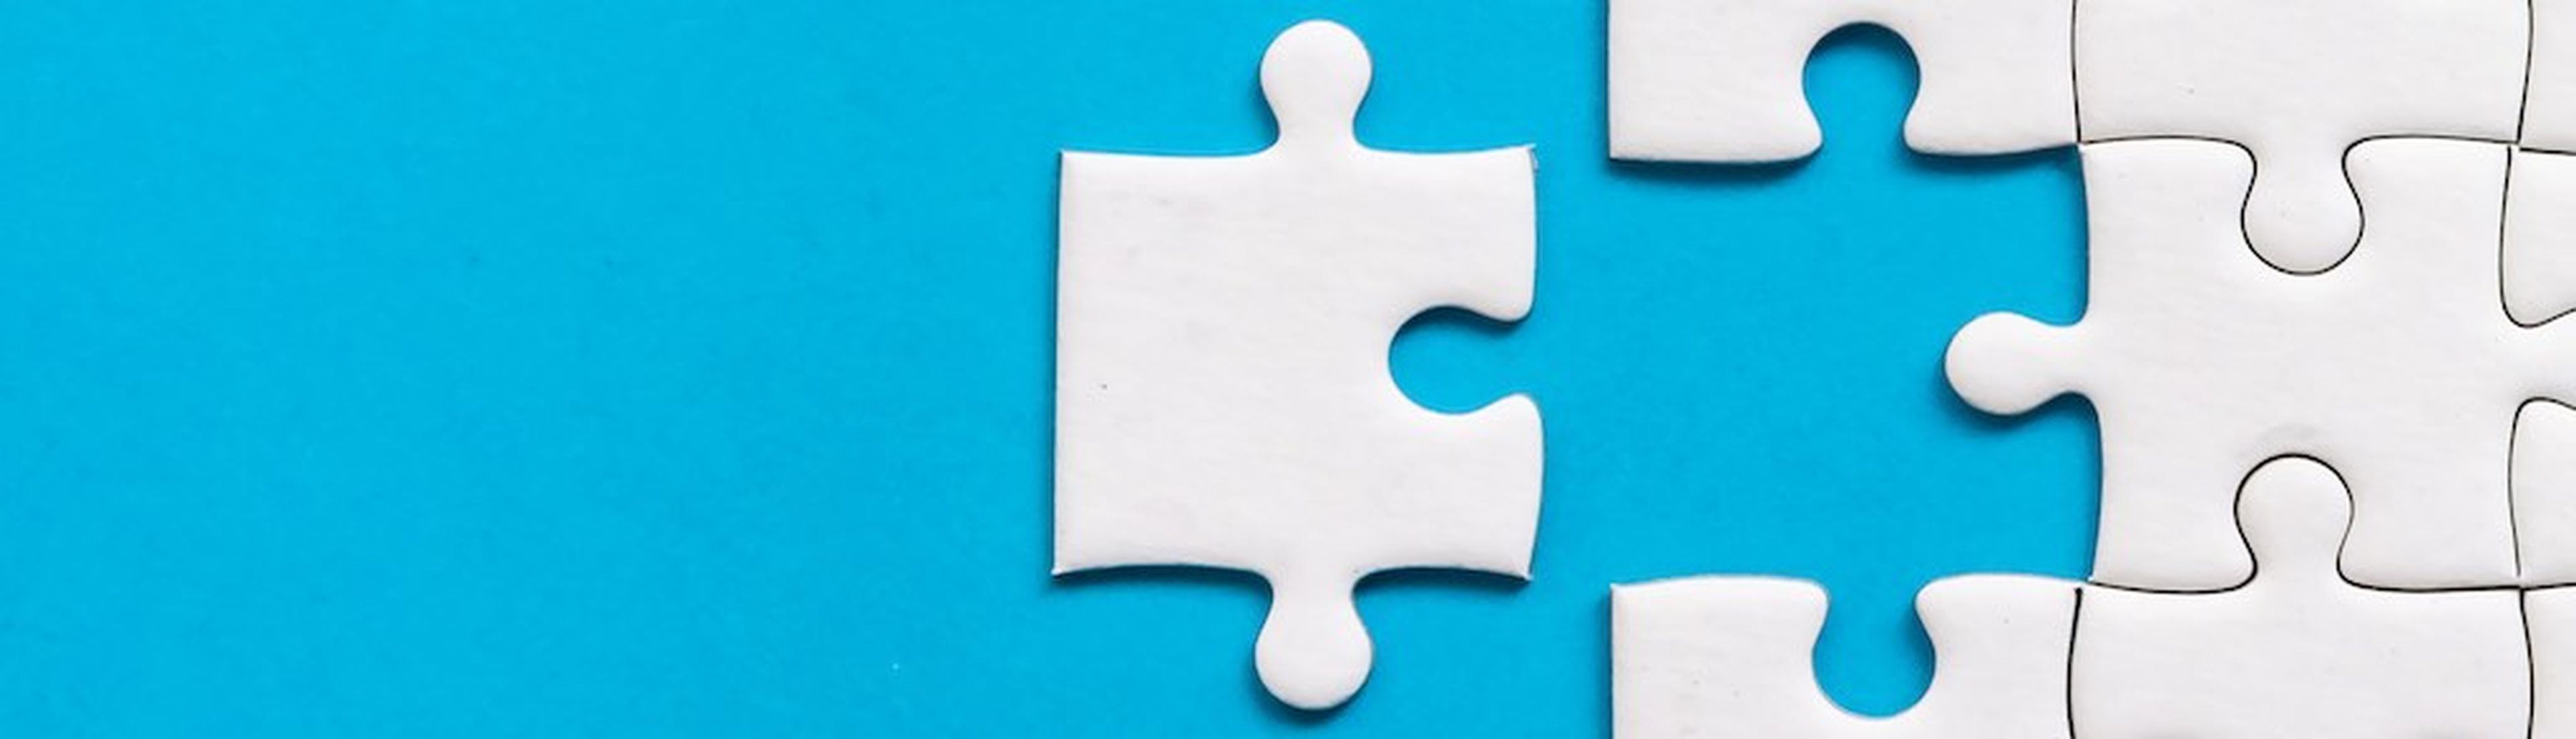 White jigsaw puzzle on blue background. Team business success partnership or teamwork